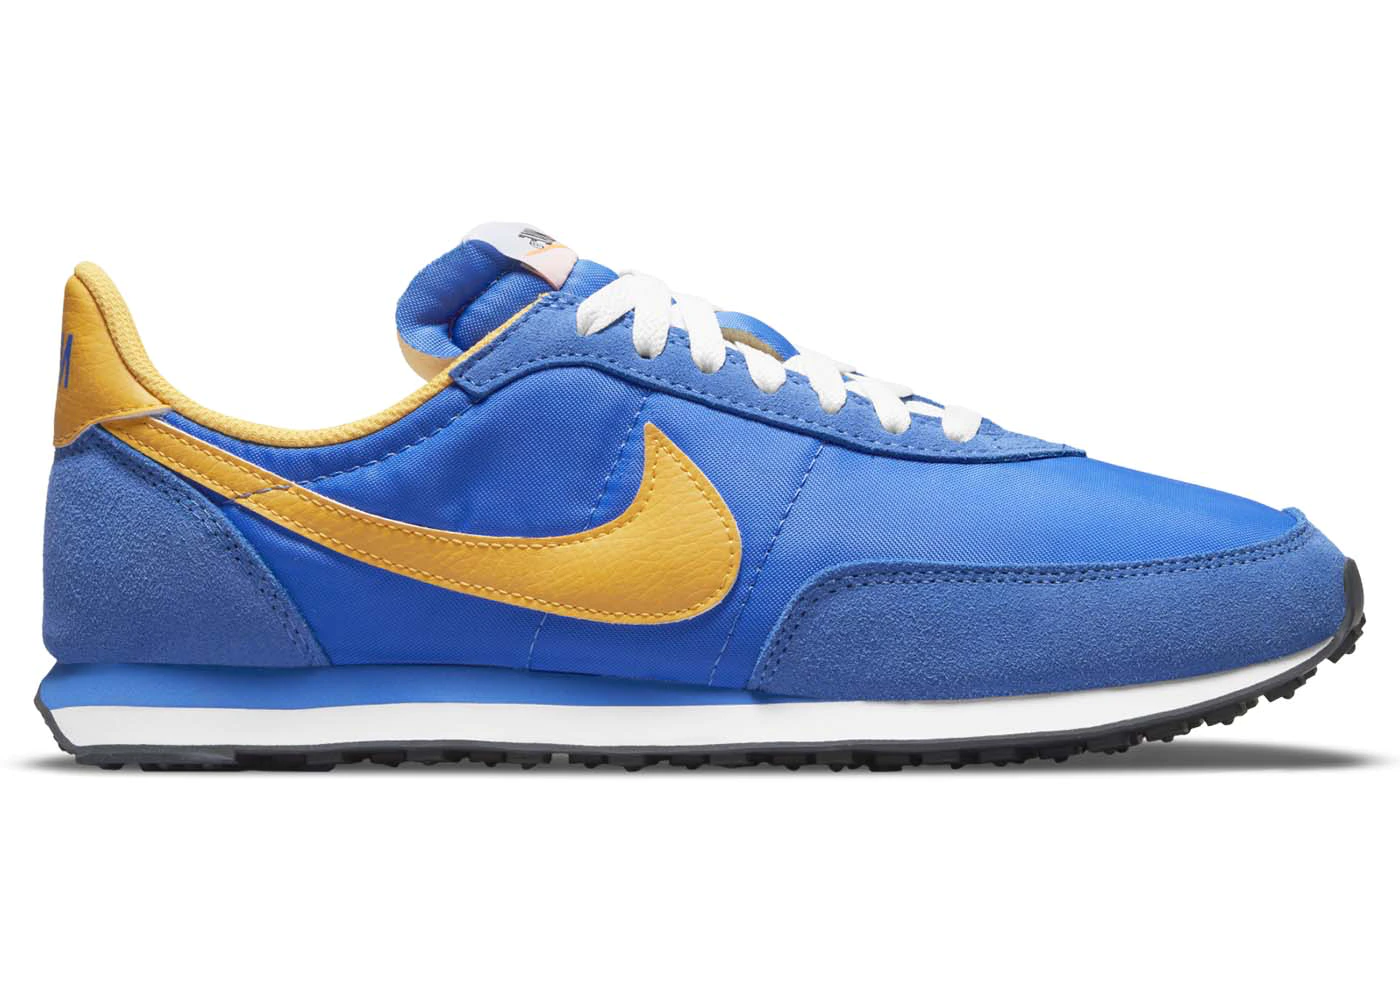 Outcome Creep to manage Nike Waffle Trainer 2 Medium Blue University Gold - DH1349-402 - US